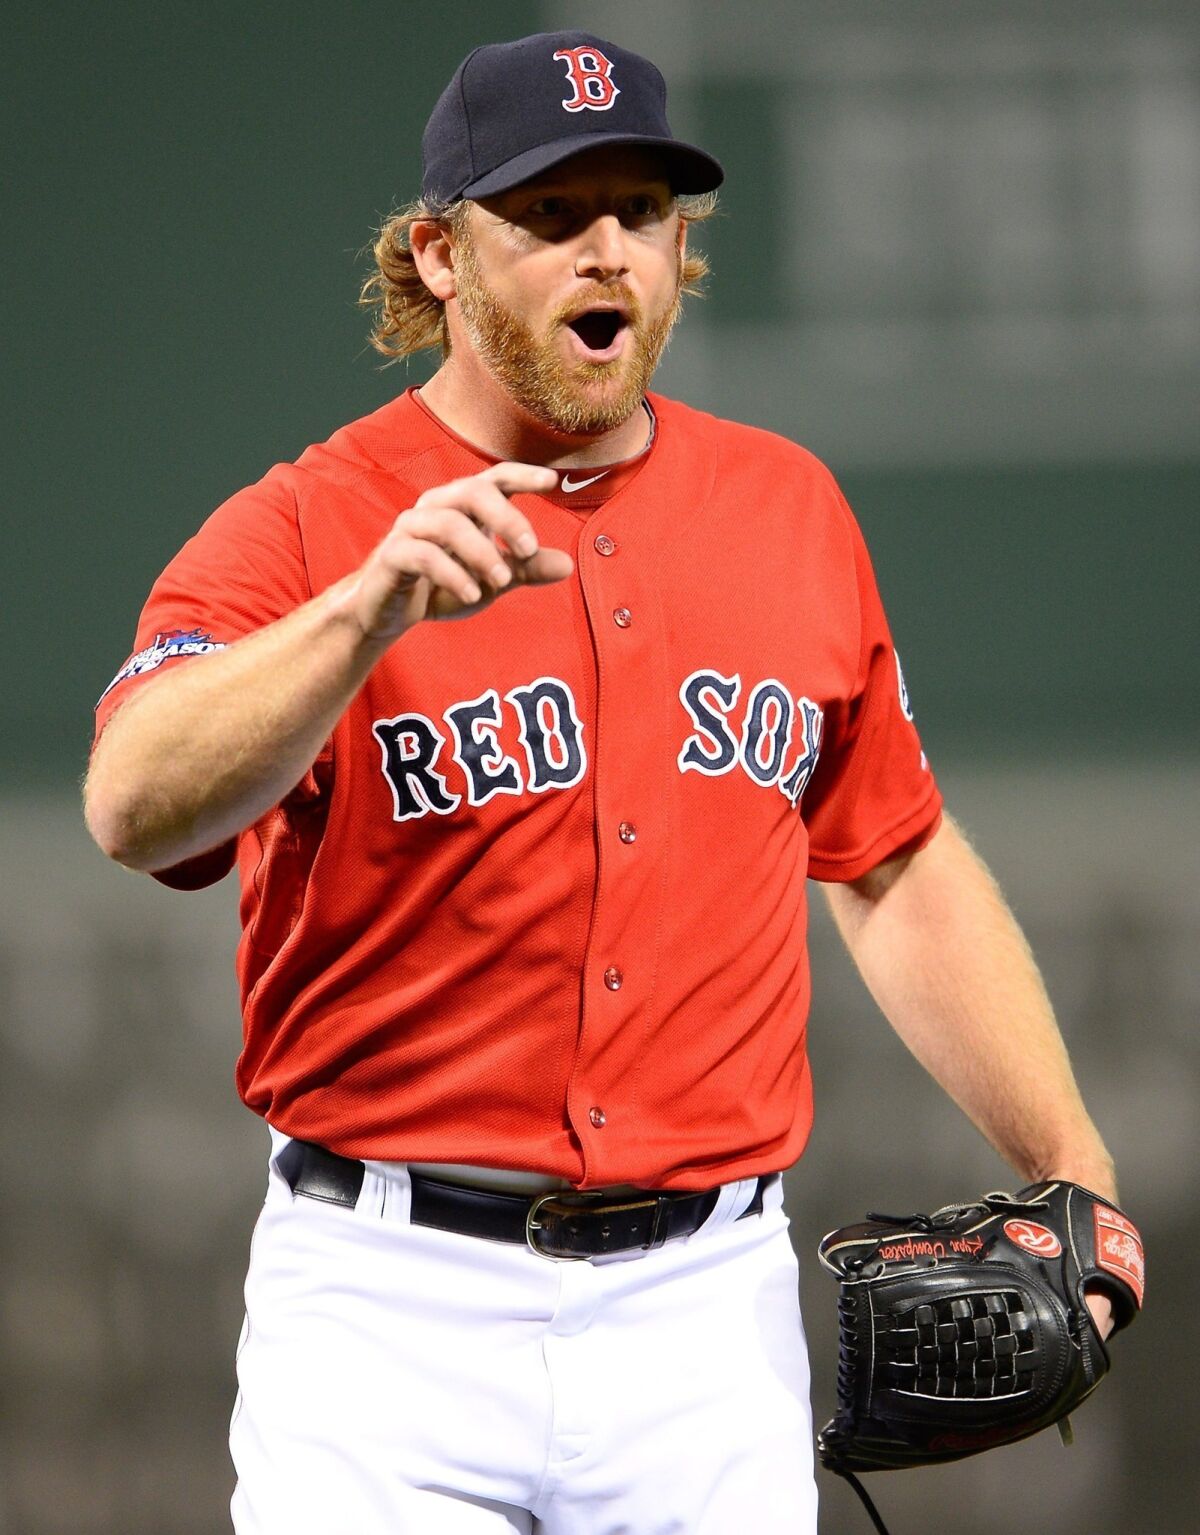 Boston Red Sox reliever Ryan Dempster is excited to be playing in the World Series despite being demoted to the bullpen.